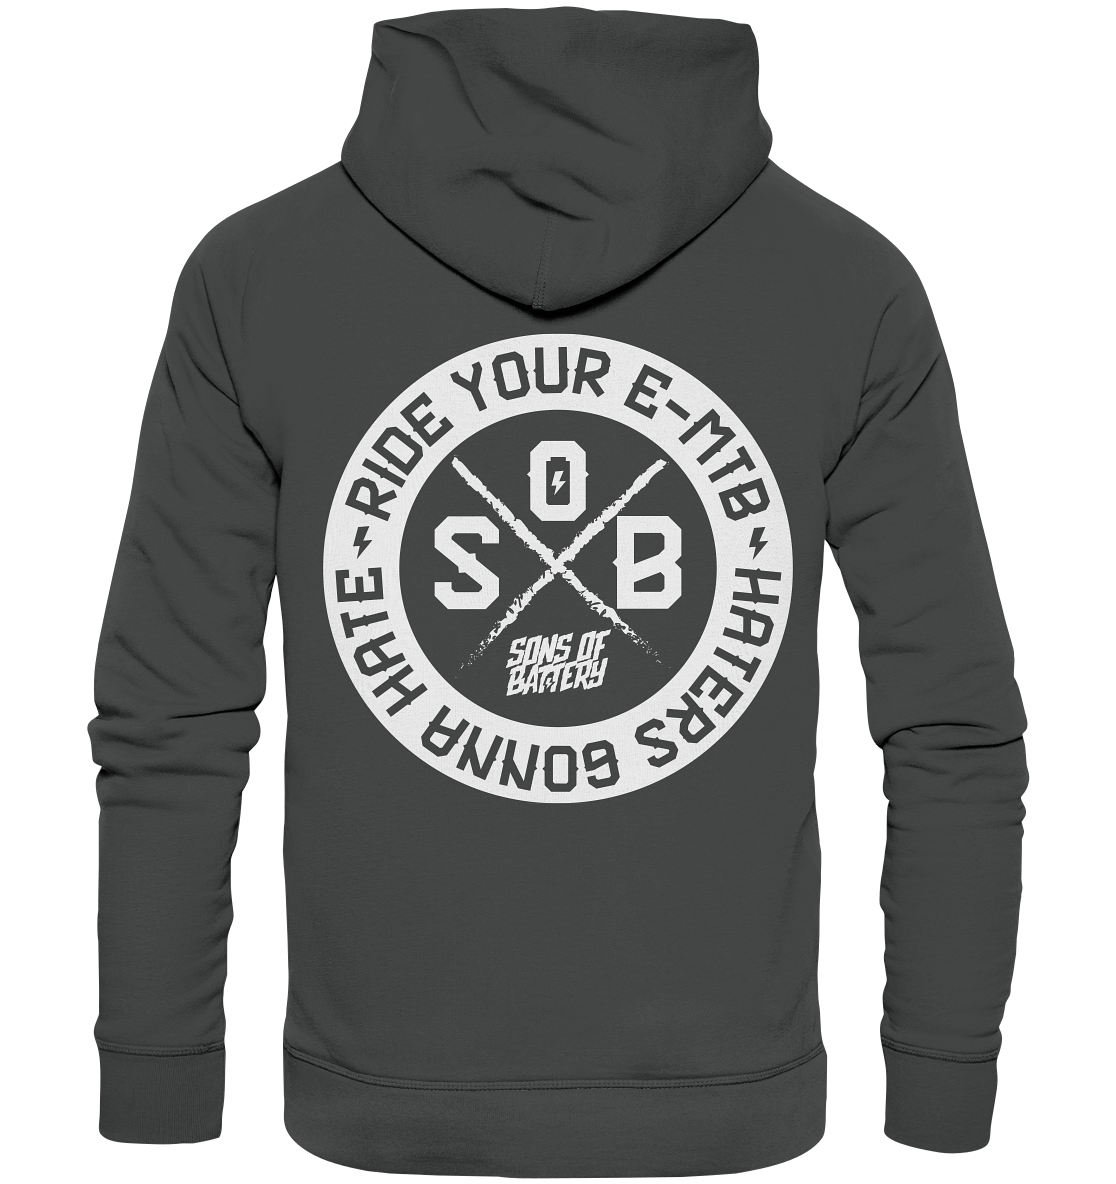 Sons of Battery® - E-MTB Brand & Community Hoodies Anthracite / XS Haters gonna Hate - Organic Fashion Hoodie (Flip Label) E-Bike-Community